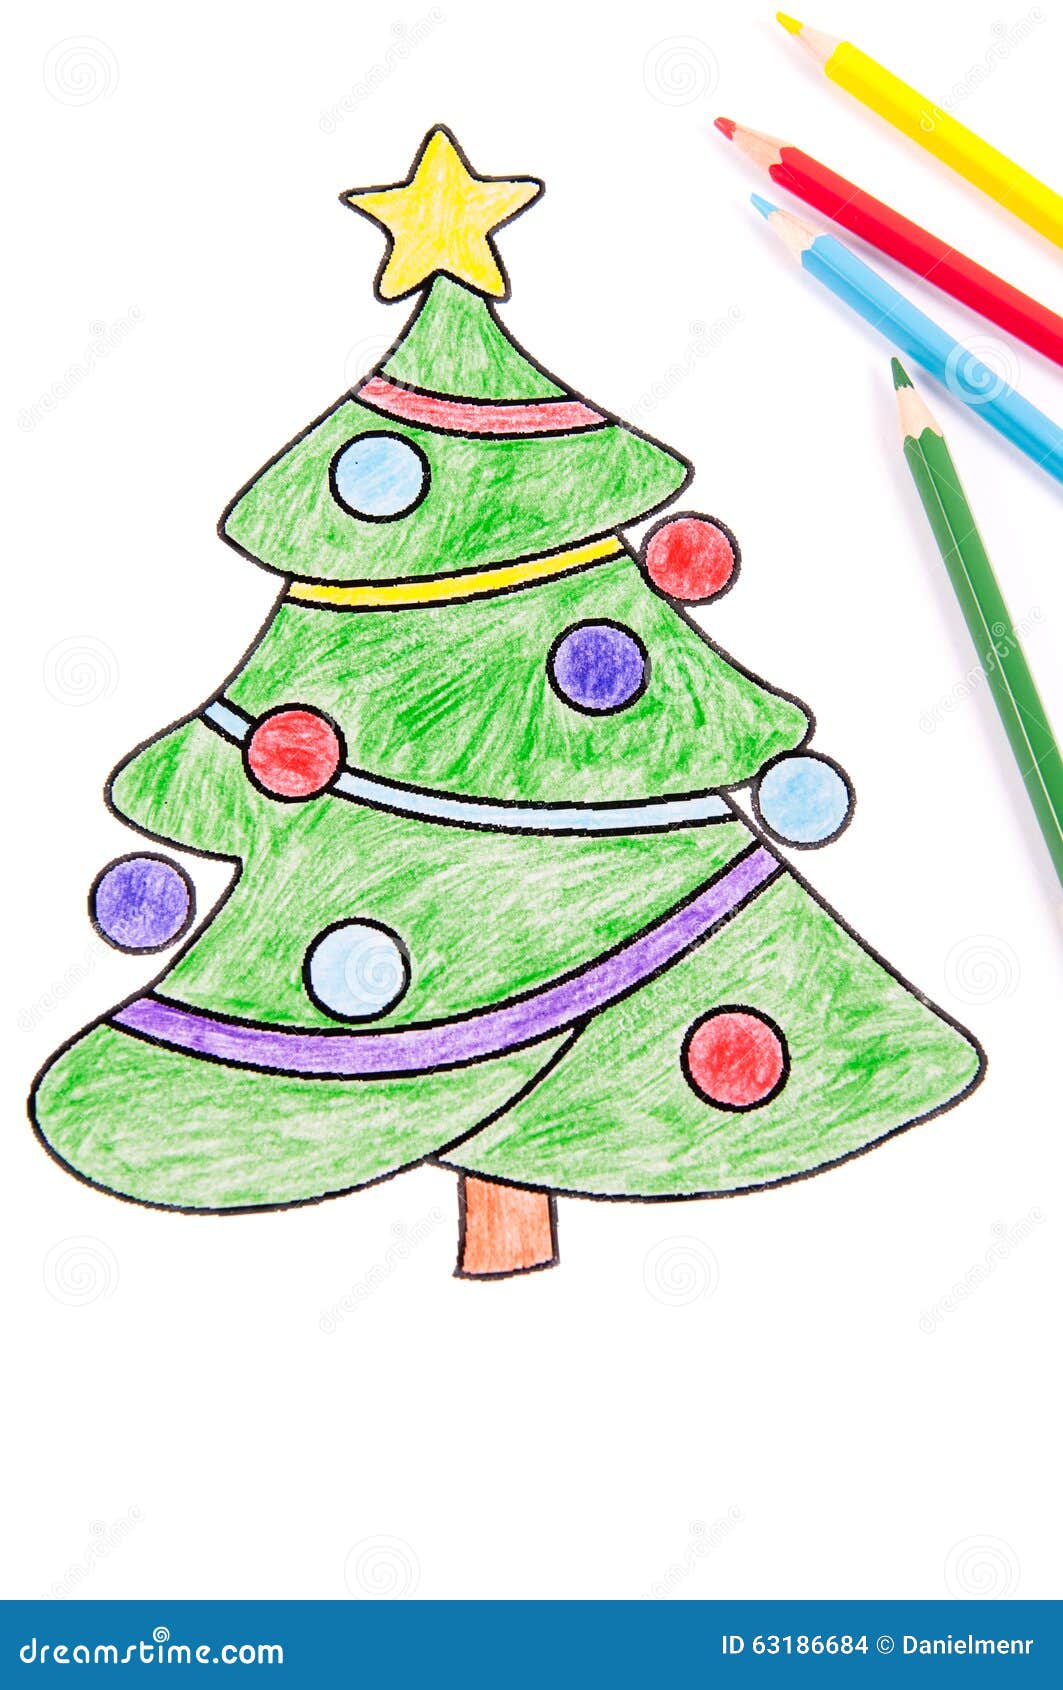 Christmas Tree With Presents Hand Drawn Illustration Stock Illustration -  Download Image Now - iStock